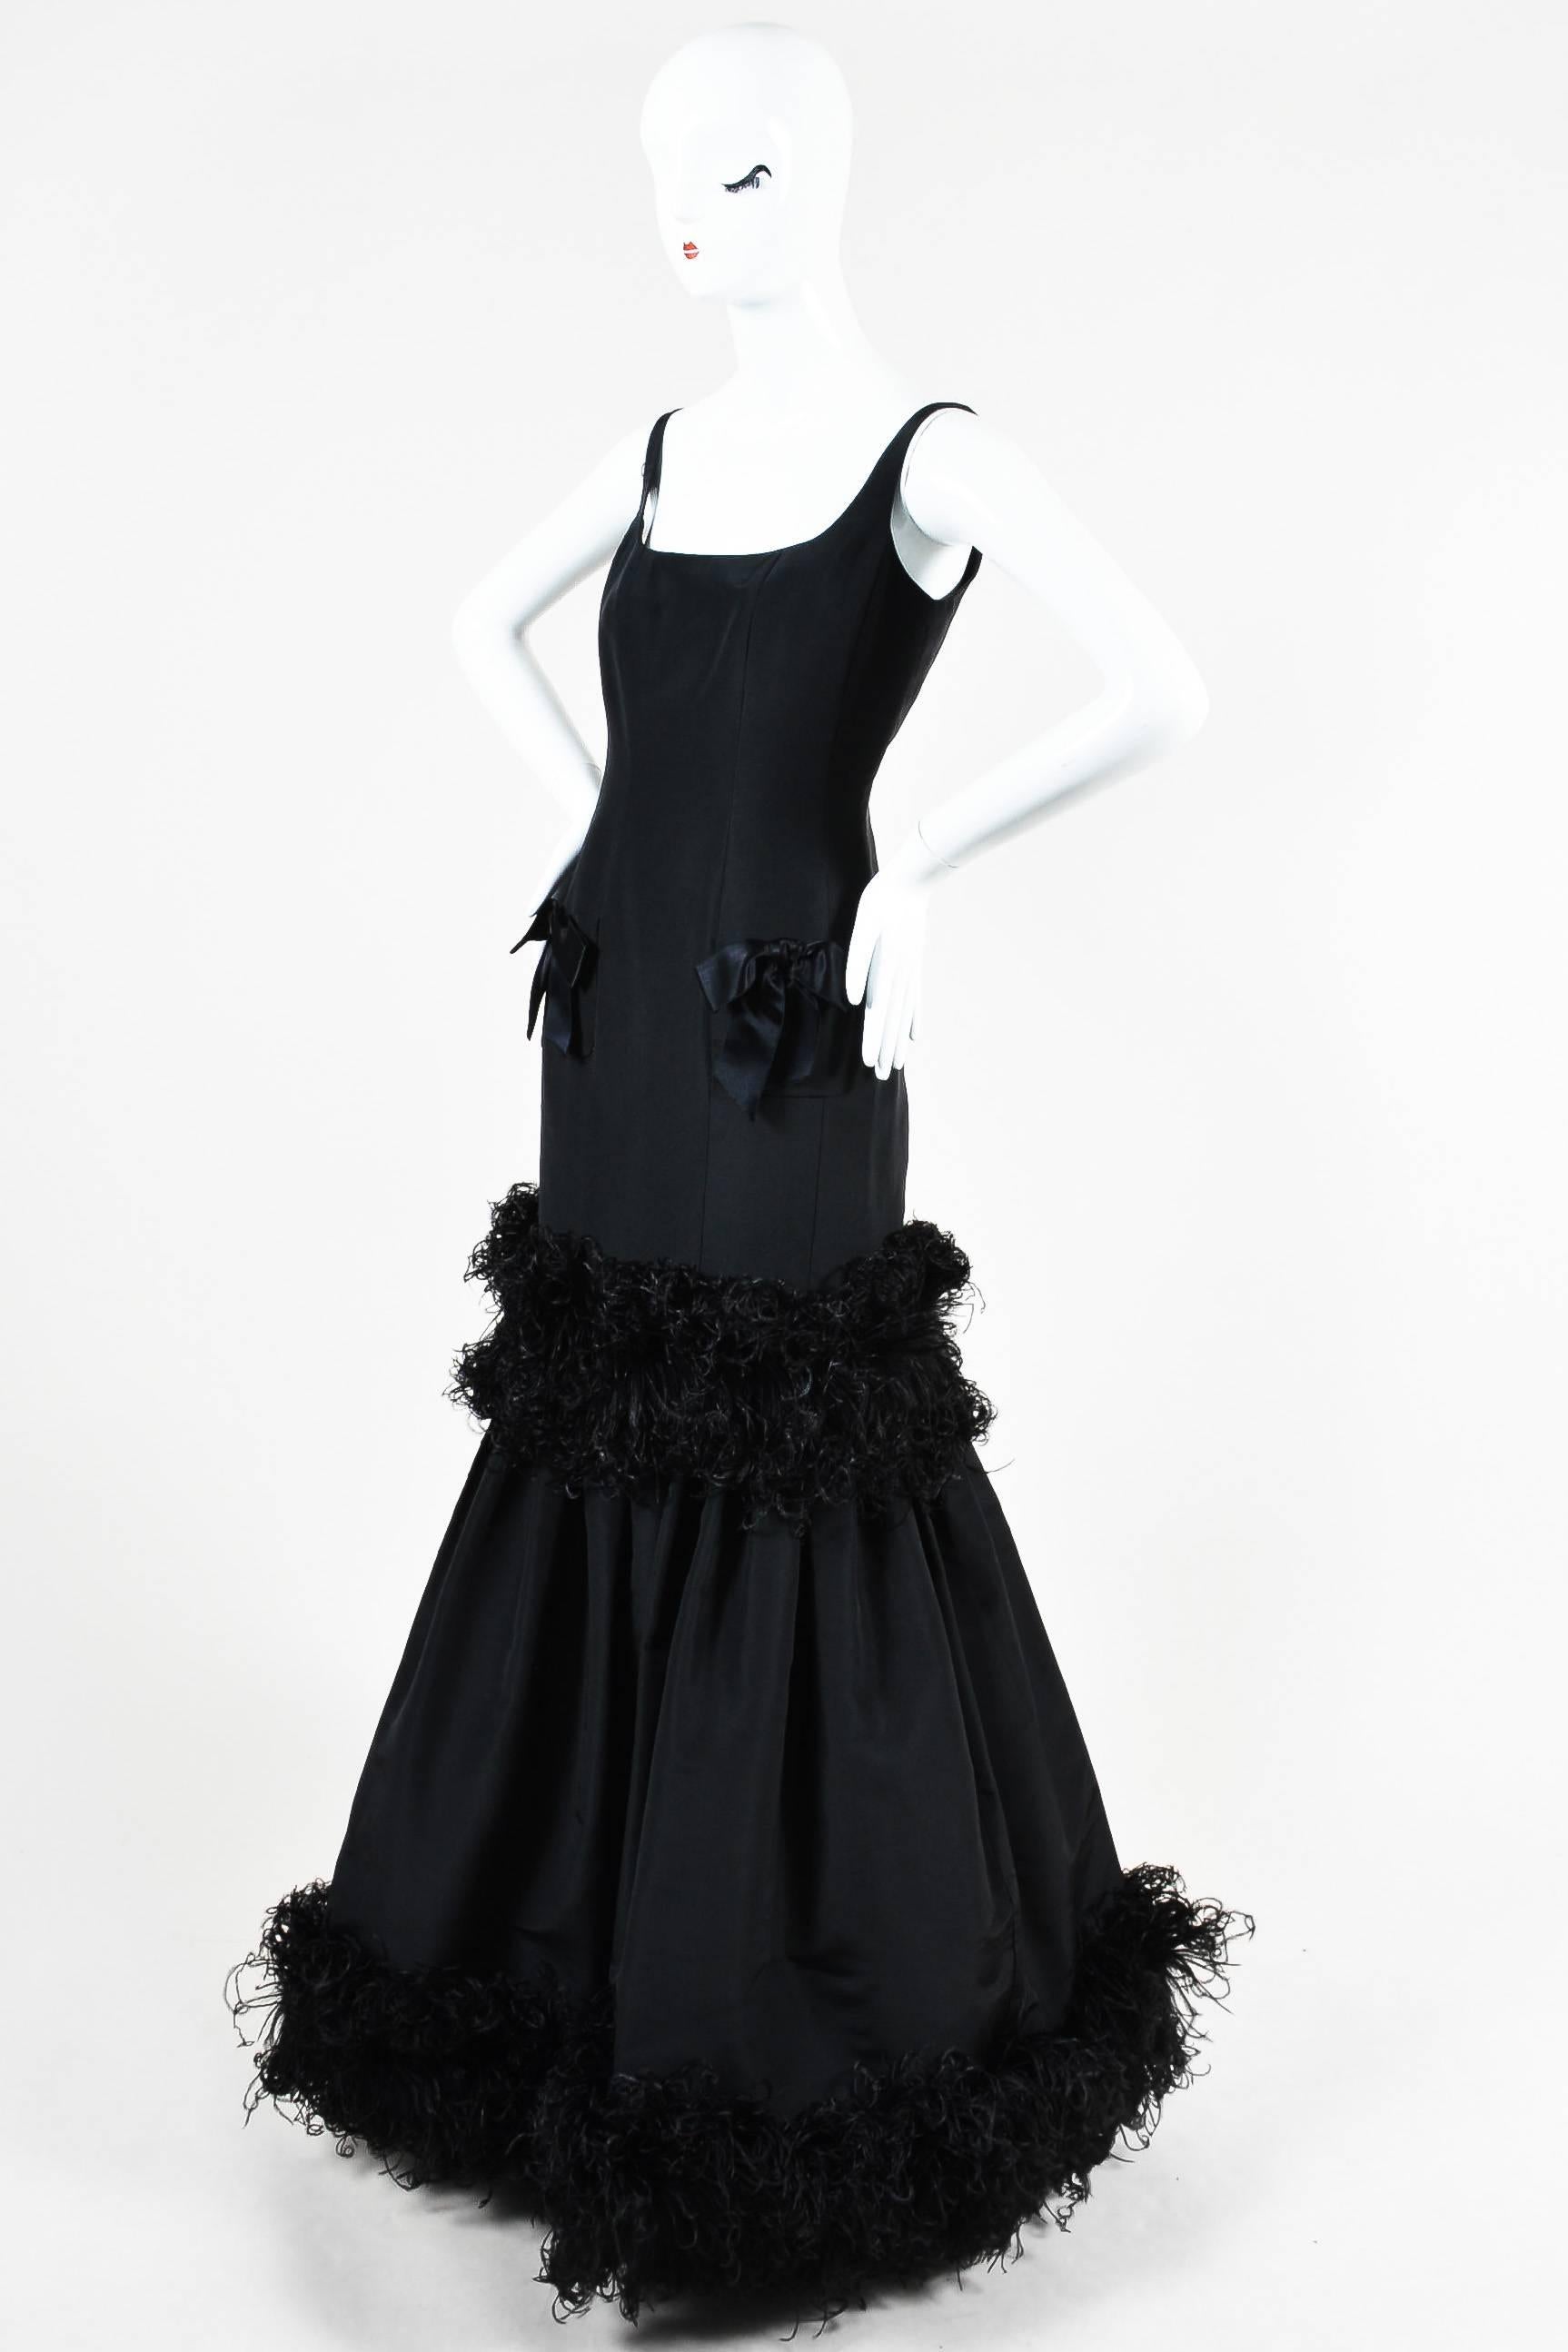 Dazzle at your next event by pairing this evening gown with sparking jewels. Constructed of black silk taffeta. Figure flattering mermaid silhouette. Feather trim appears to be genuine ostrich feathers. Front pockets detailed with satin bows. Square